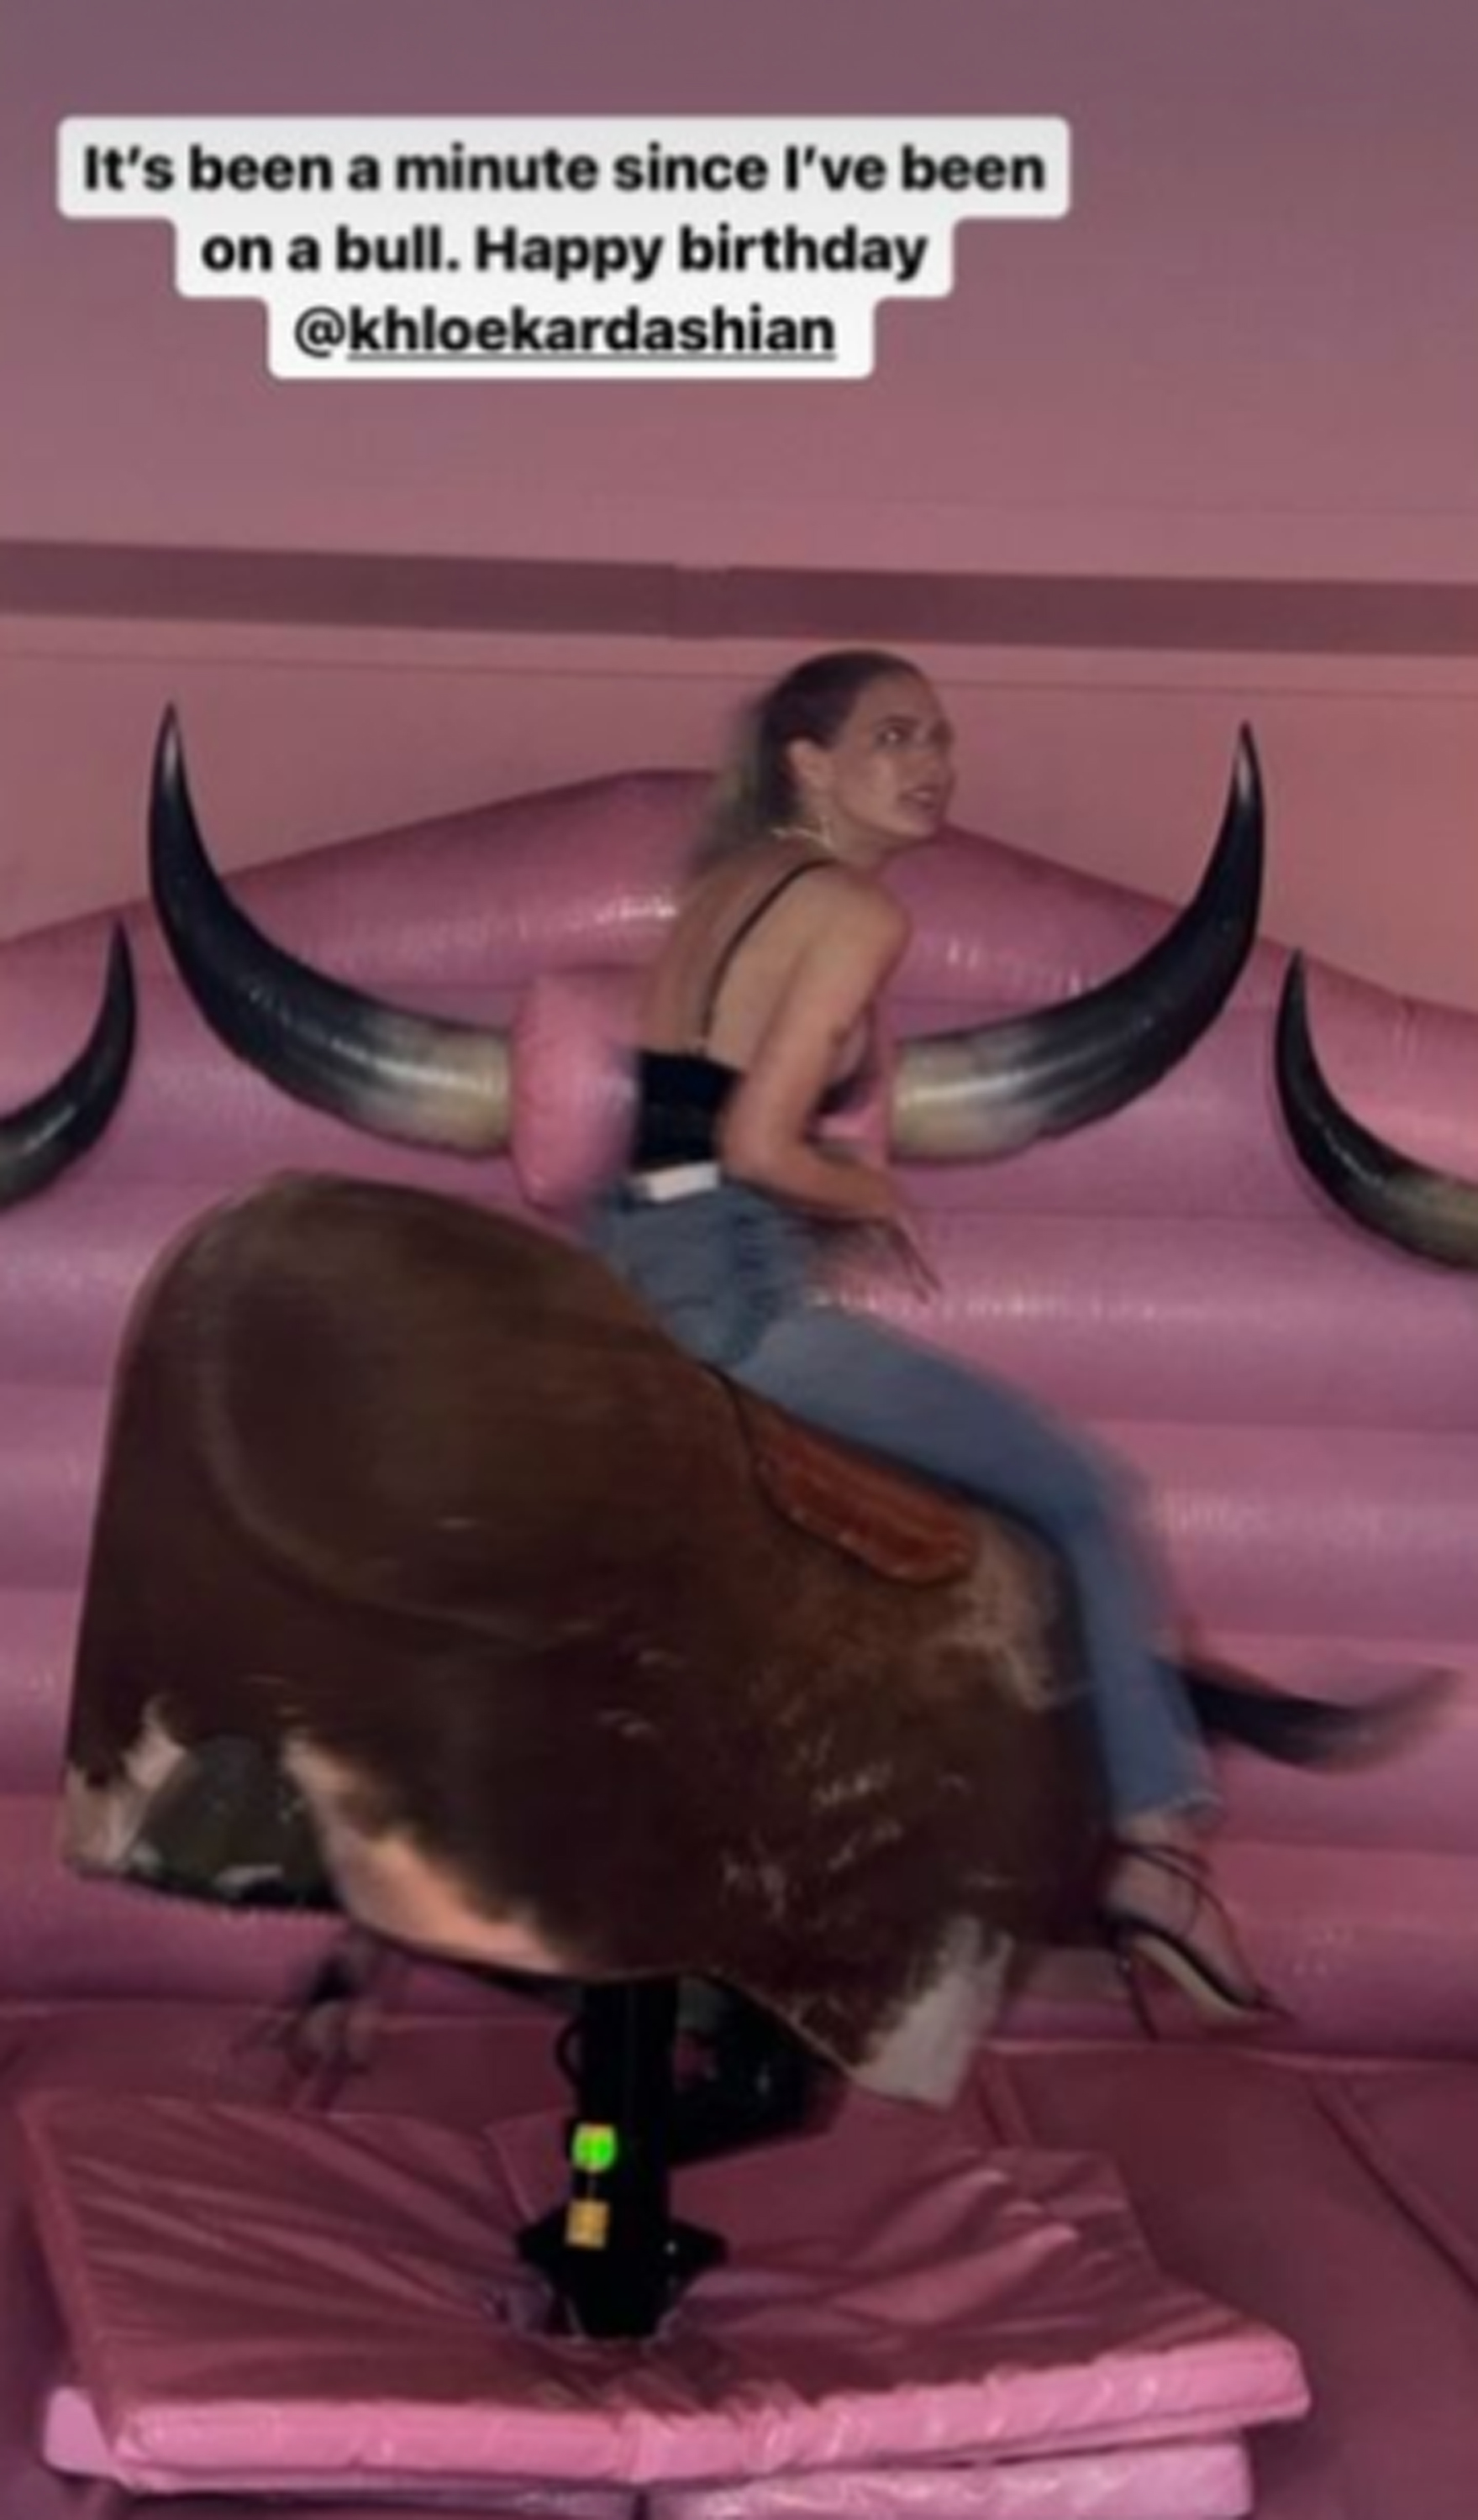 A guest at Khloe Kardashian's western-themed birthday party riding a mechanical bull